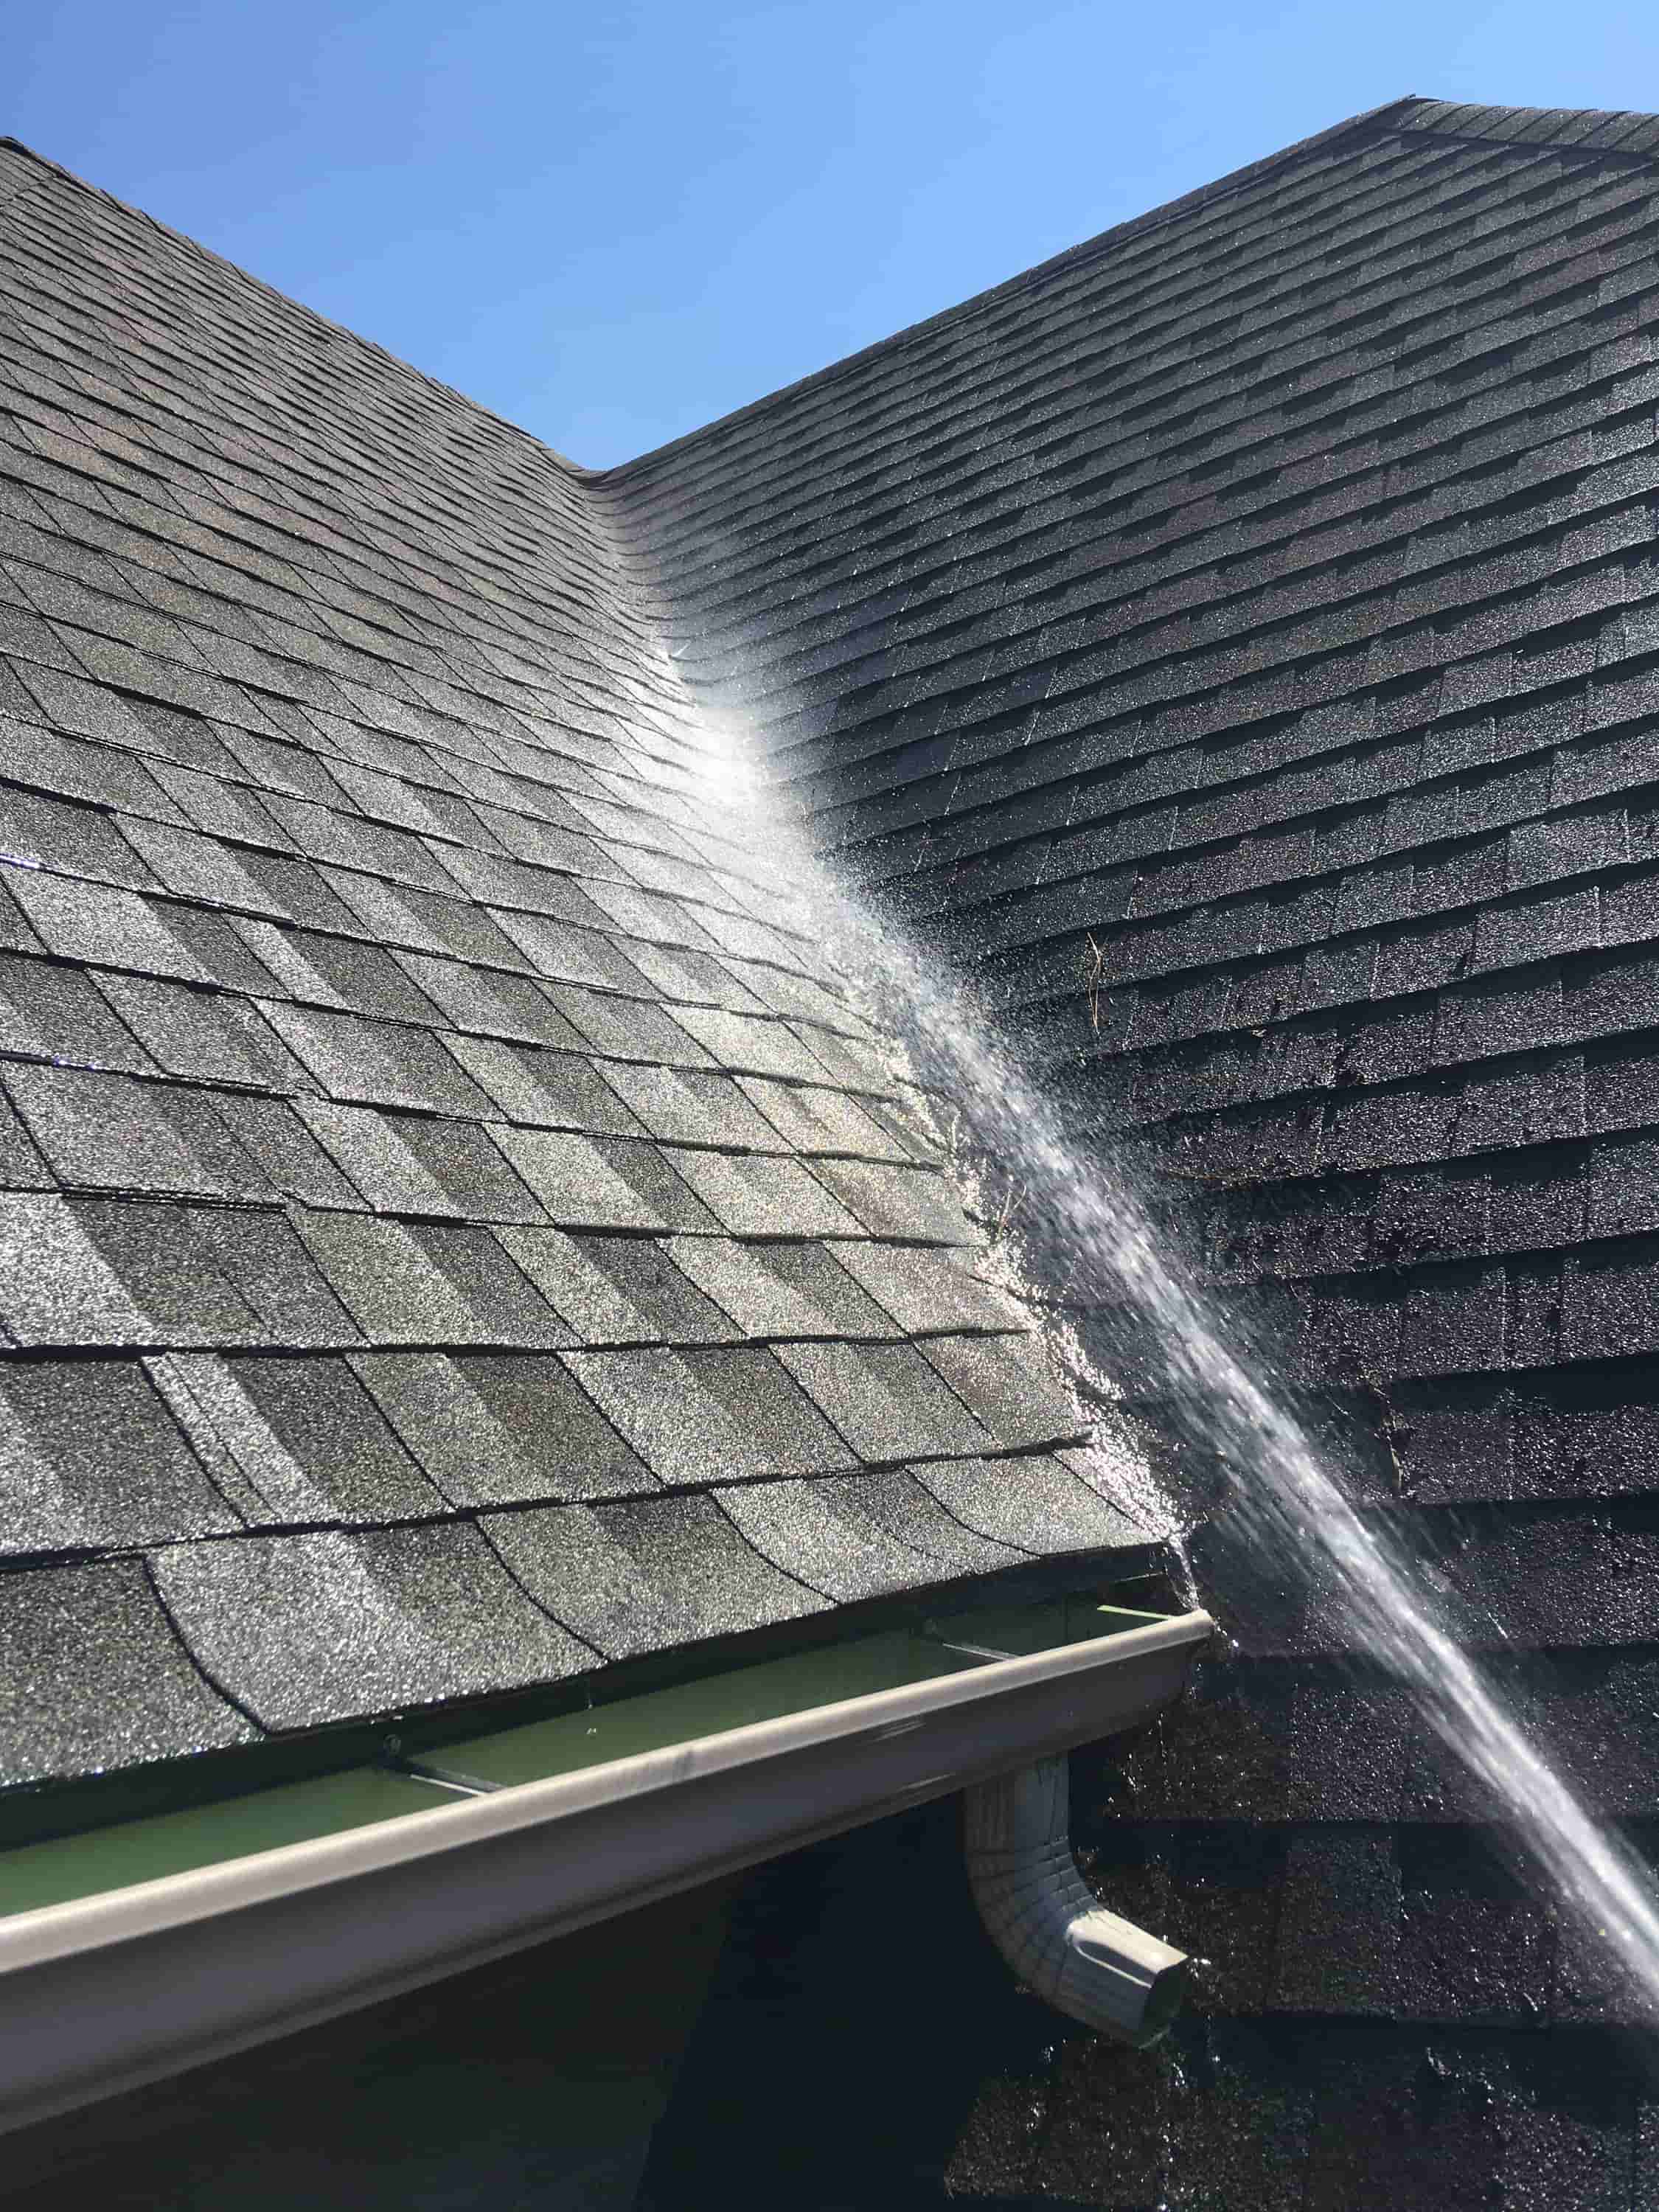 gutter cleaning costs average